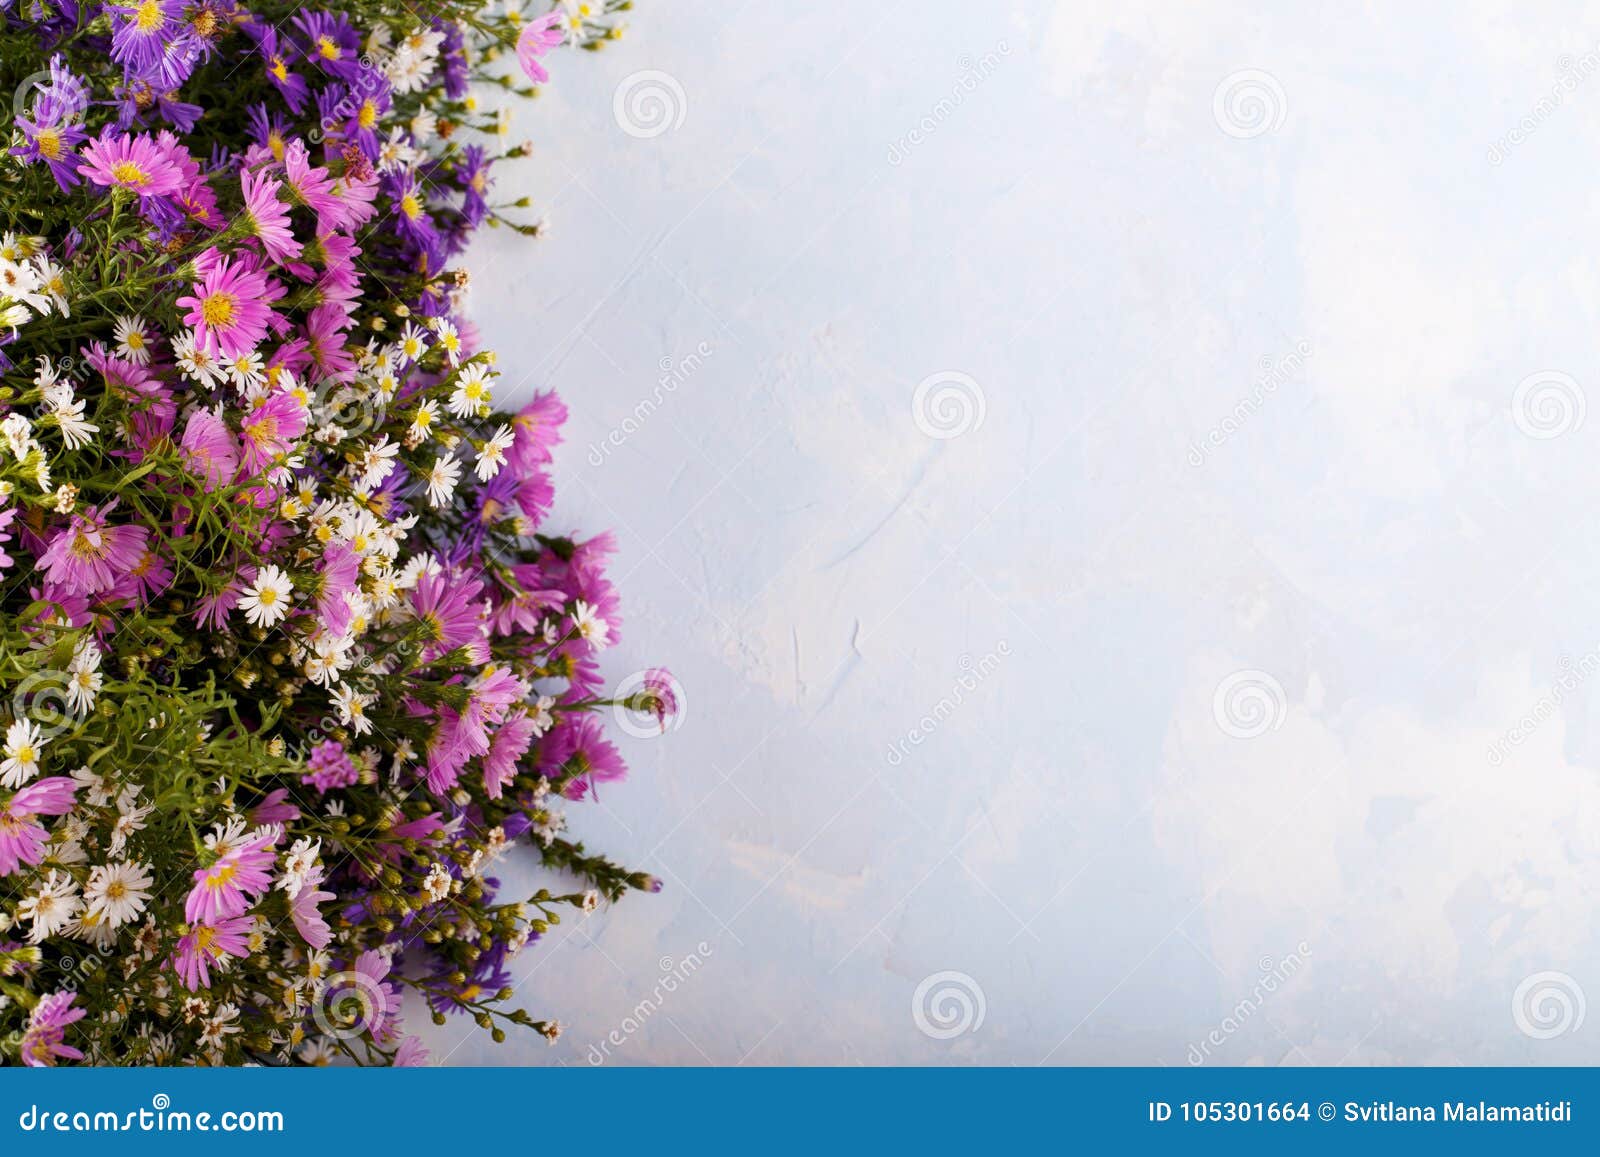 Bouquet of colorful aster stock photo. Image of beauty - 105301664